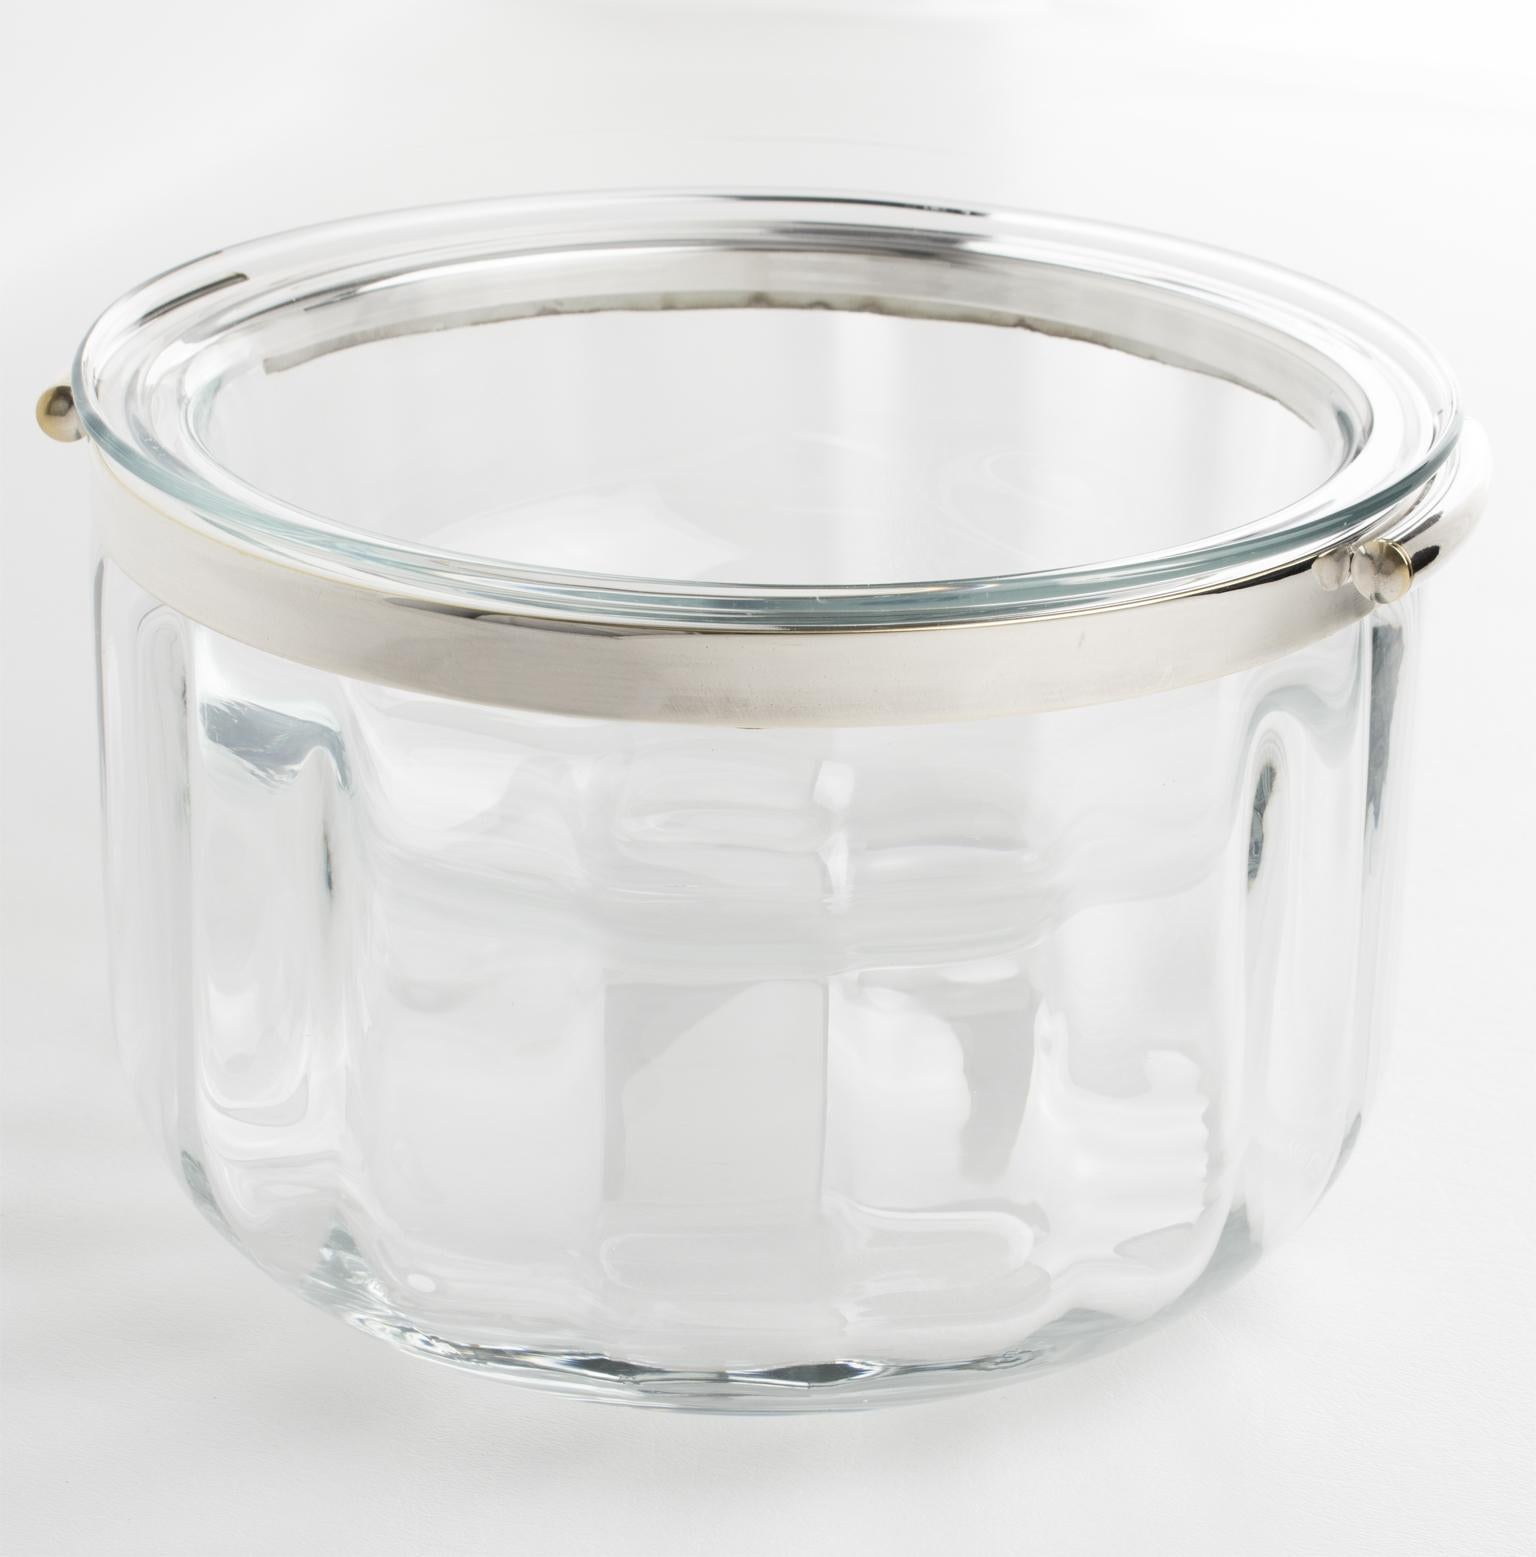 This stylish French modernist silver plate and crystal caviar serving bowl, dish, or chiller was designed by silversmith Christofle in the 1950s for its Fleuron Collection. 
This set features a two-handled, rounded outer crystal ice bowl container